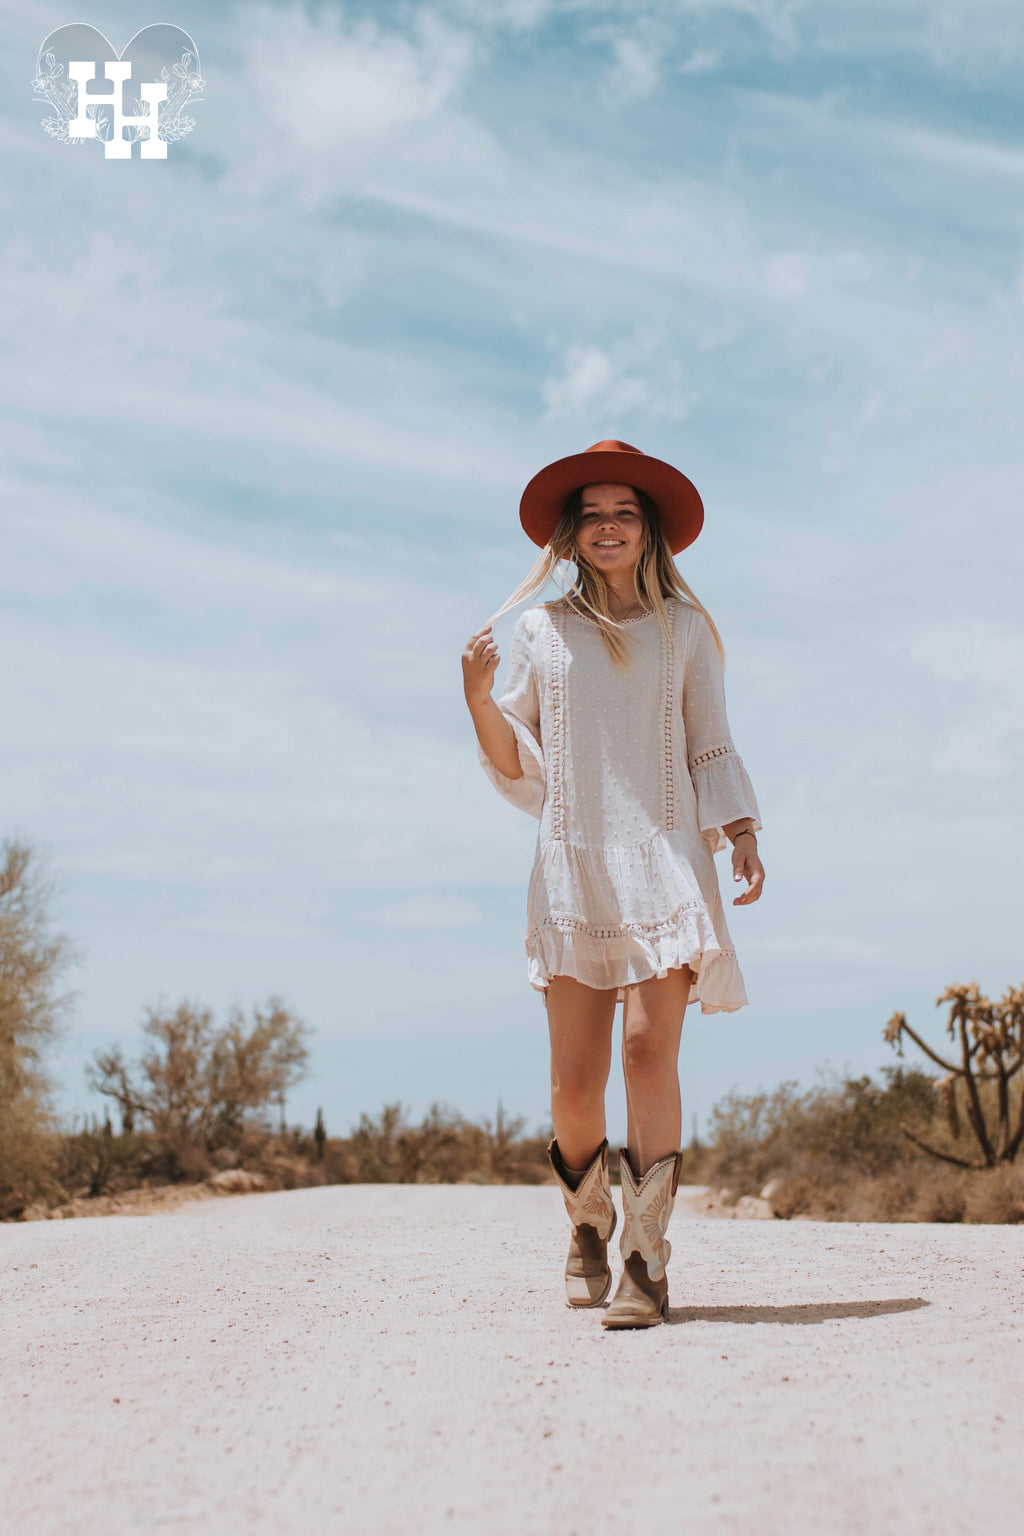 Girl walking down dirt road in a cream color mid thigh length dress. Dress has a drop waist with 3/4 length sleeves that have belled details at the end. Fabric is swiss dotted. She is wearing the dress with boots and a burnt organe wide brim hat.